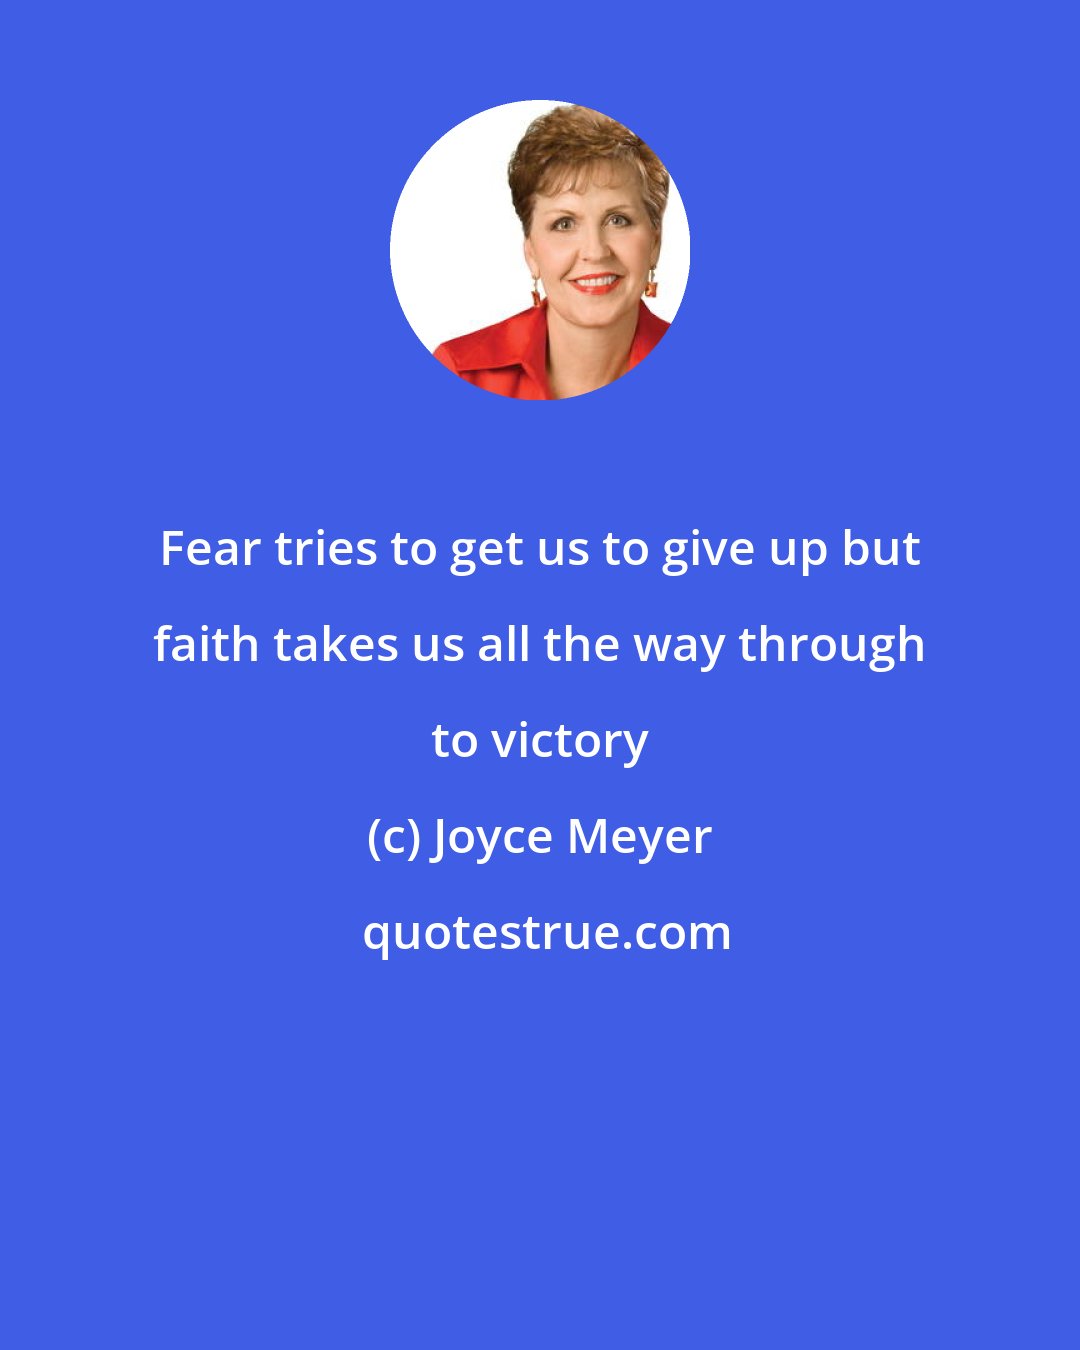 Joyce Meyer: Fear tries to get us to give up but faith takes us all the way through to victory